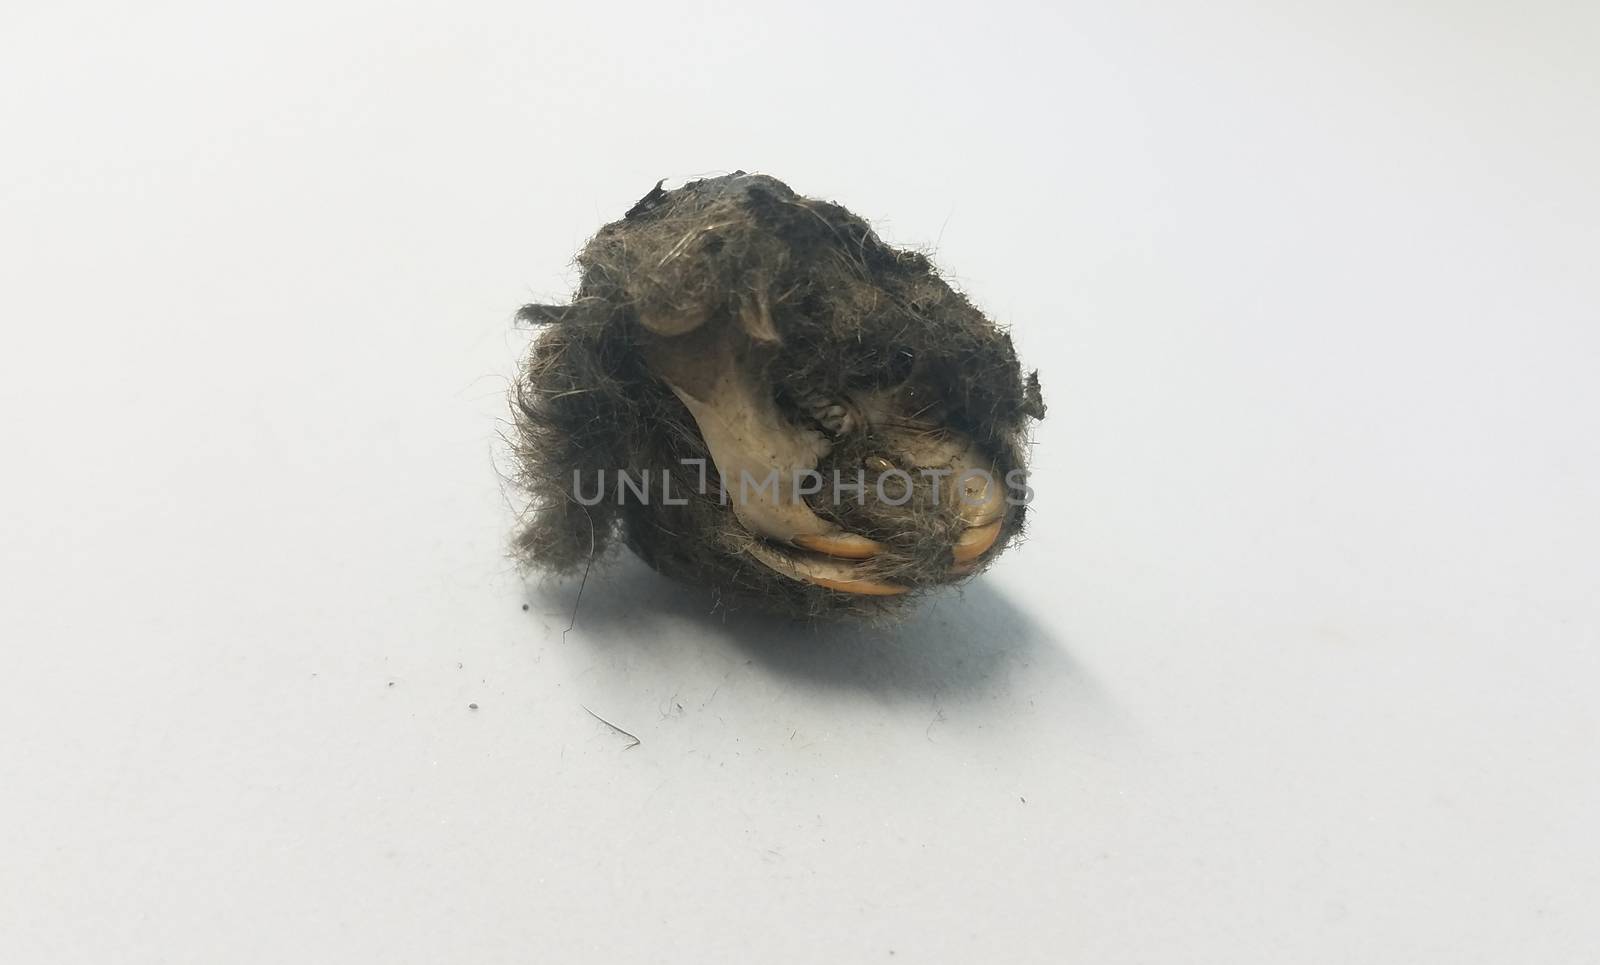 rat skull and teeth and black hair from owl pellet on white background by stockphotofan1